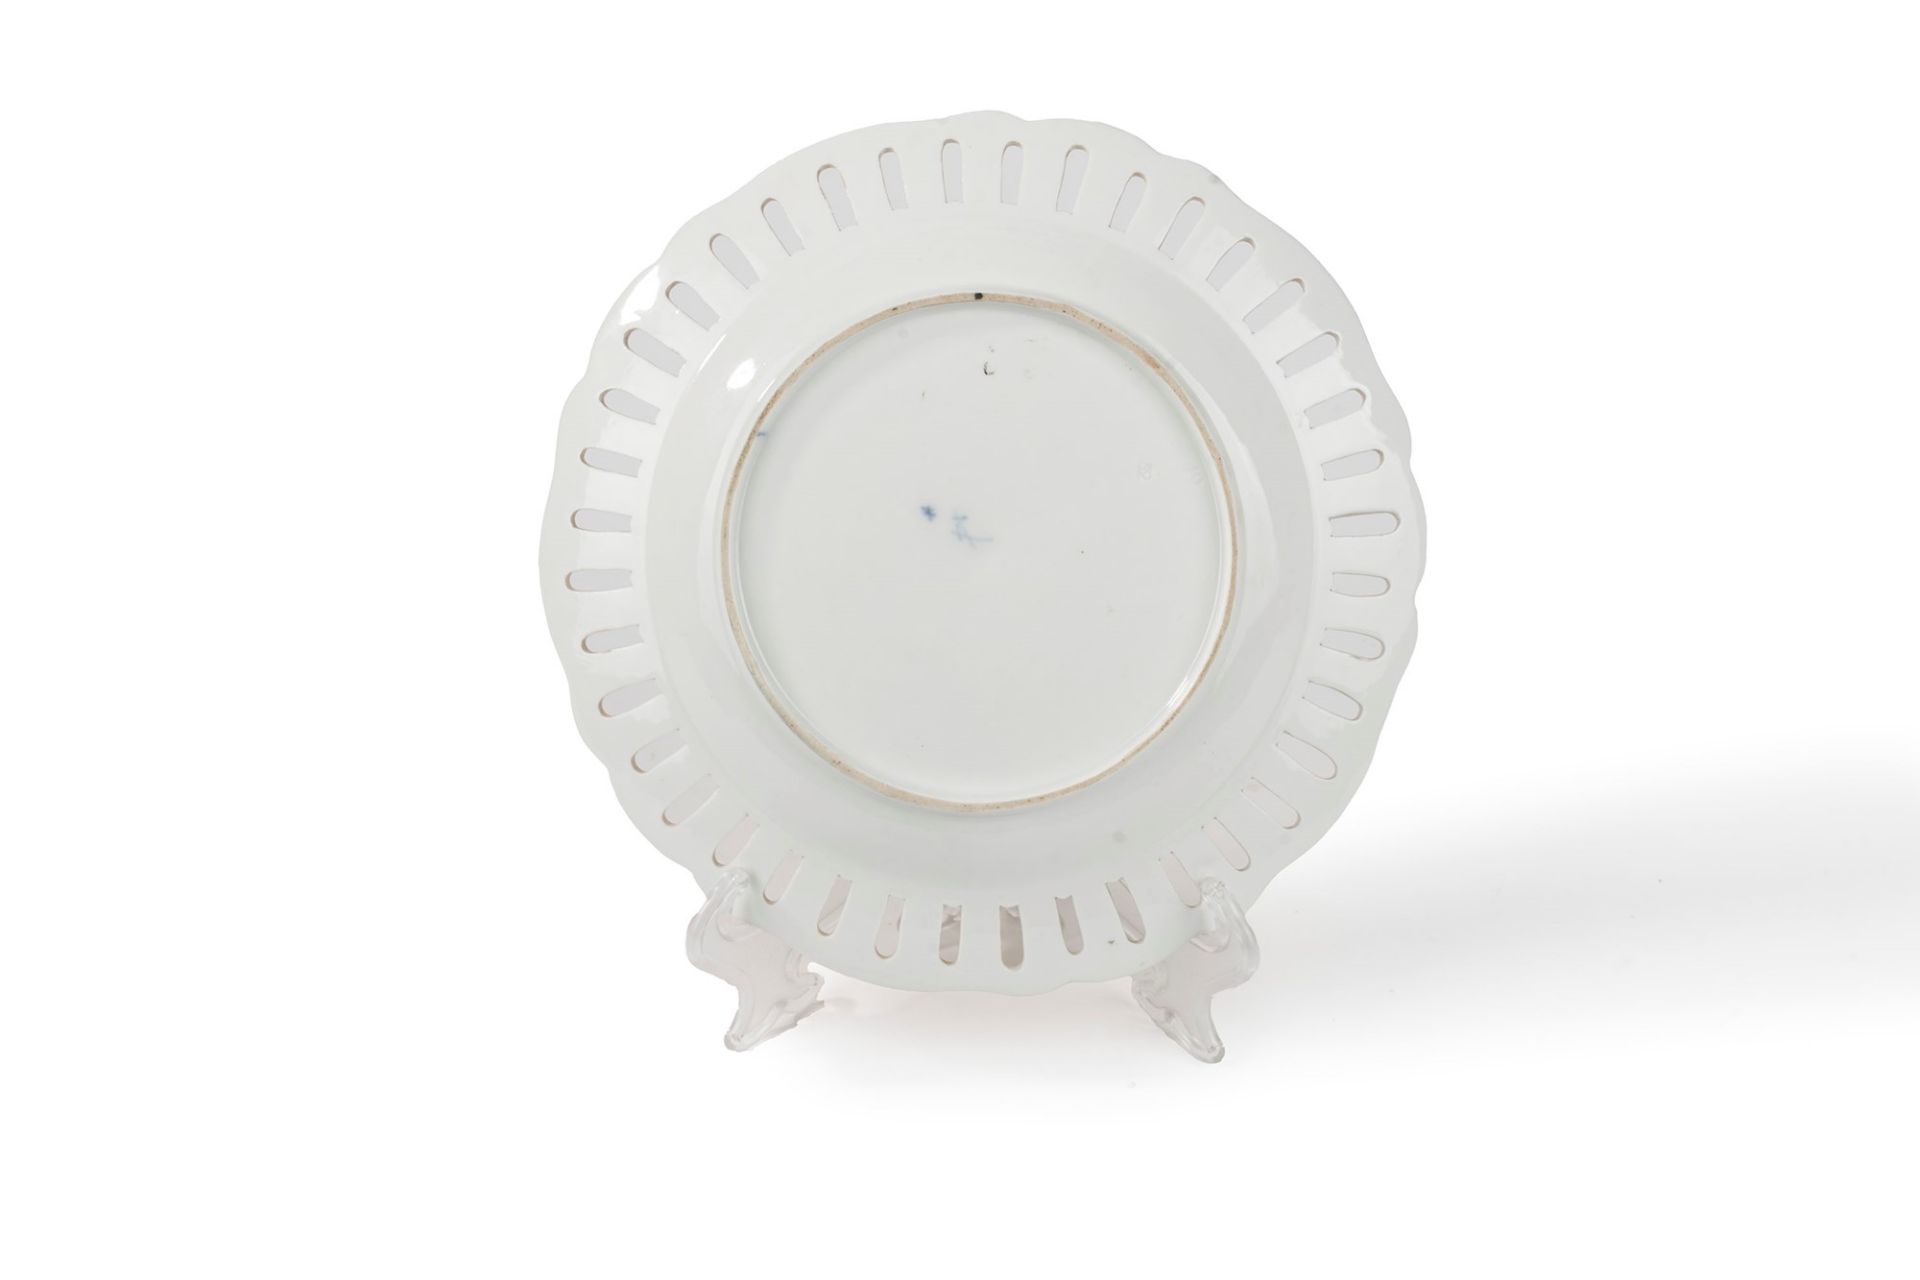 Porcelain plate with perforated rim, Meissen manufacture, late 18th century - Image 2 of 3